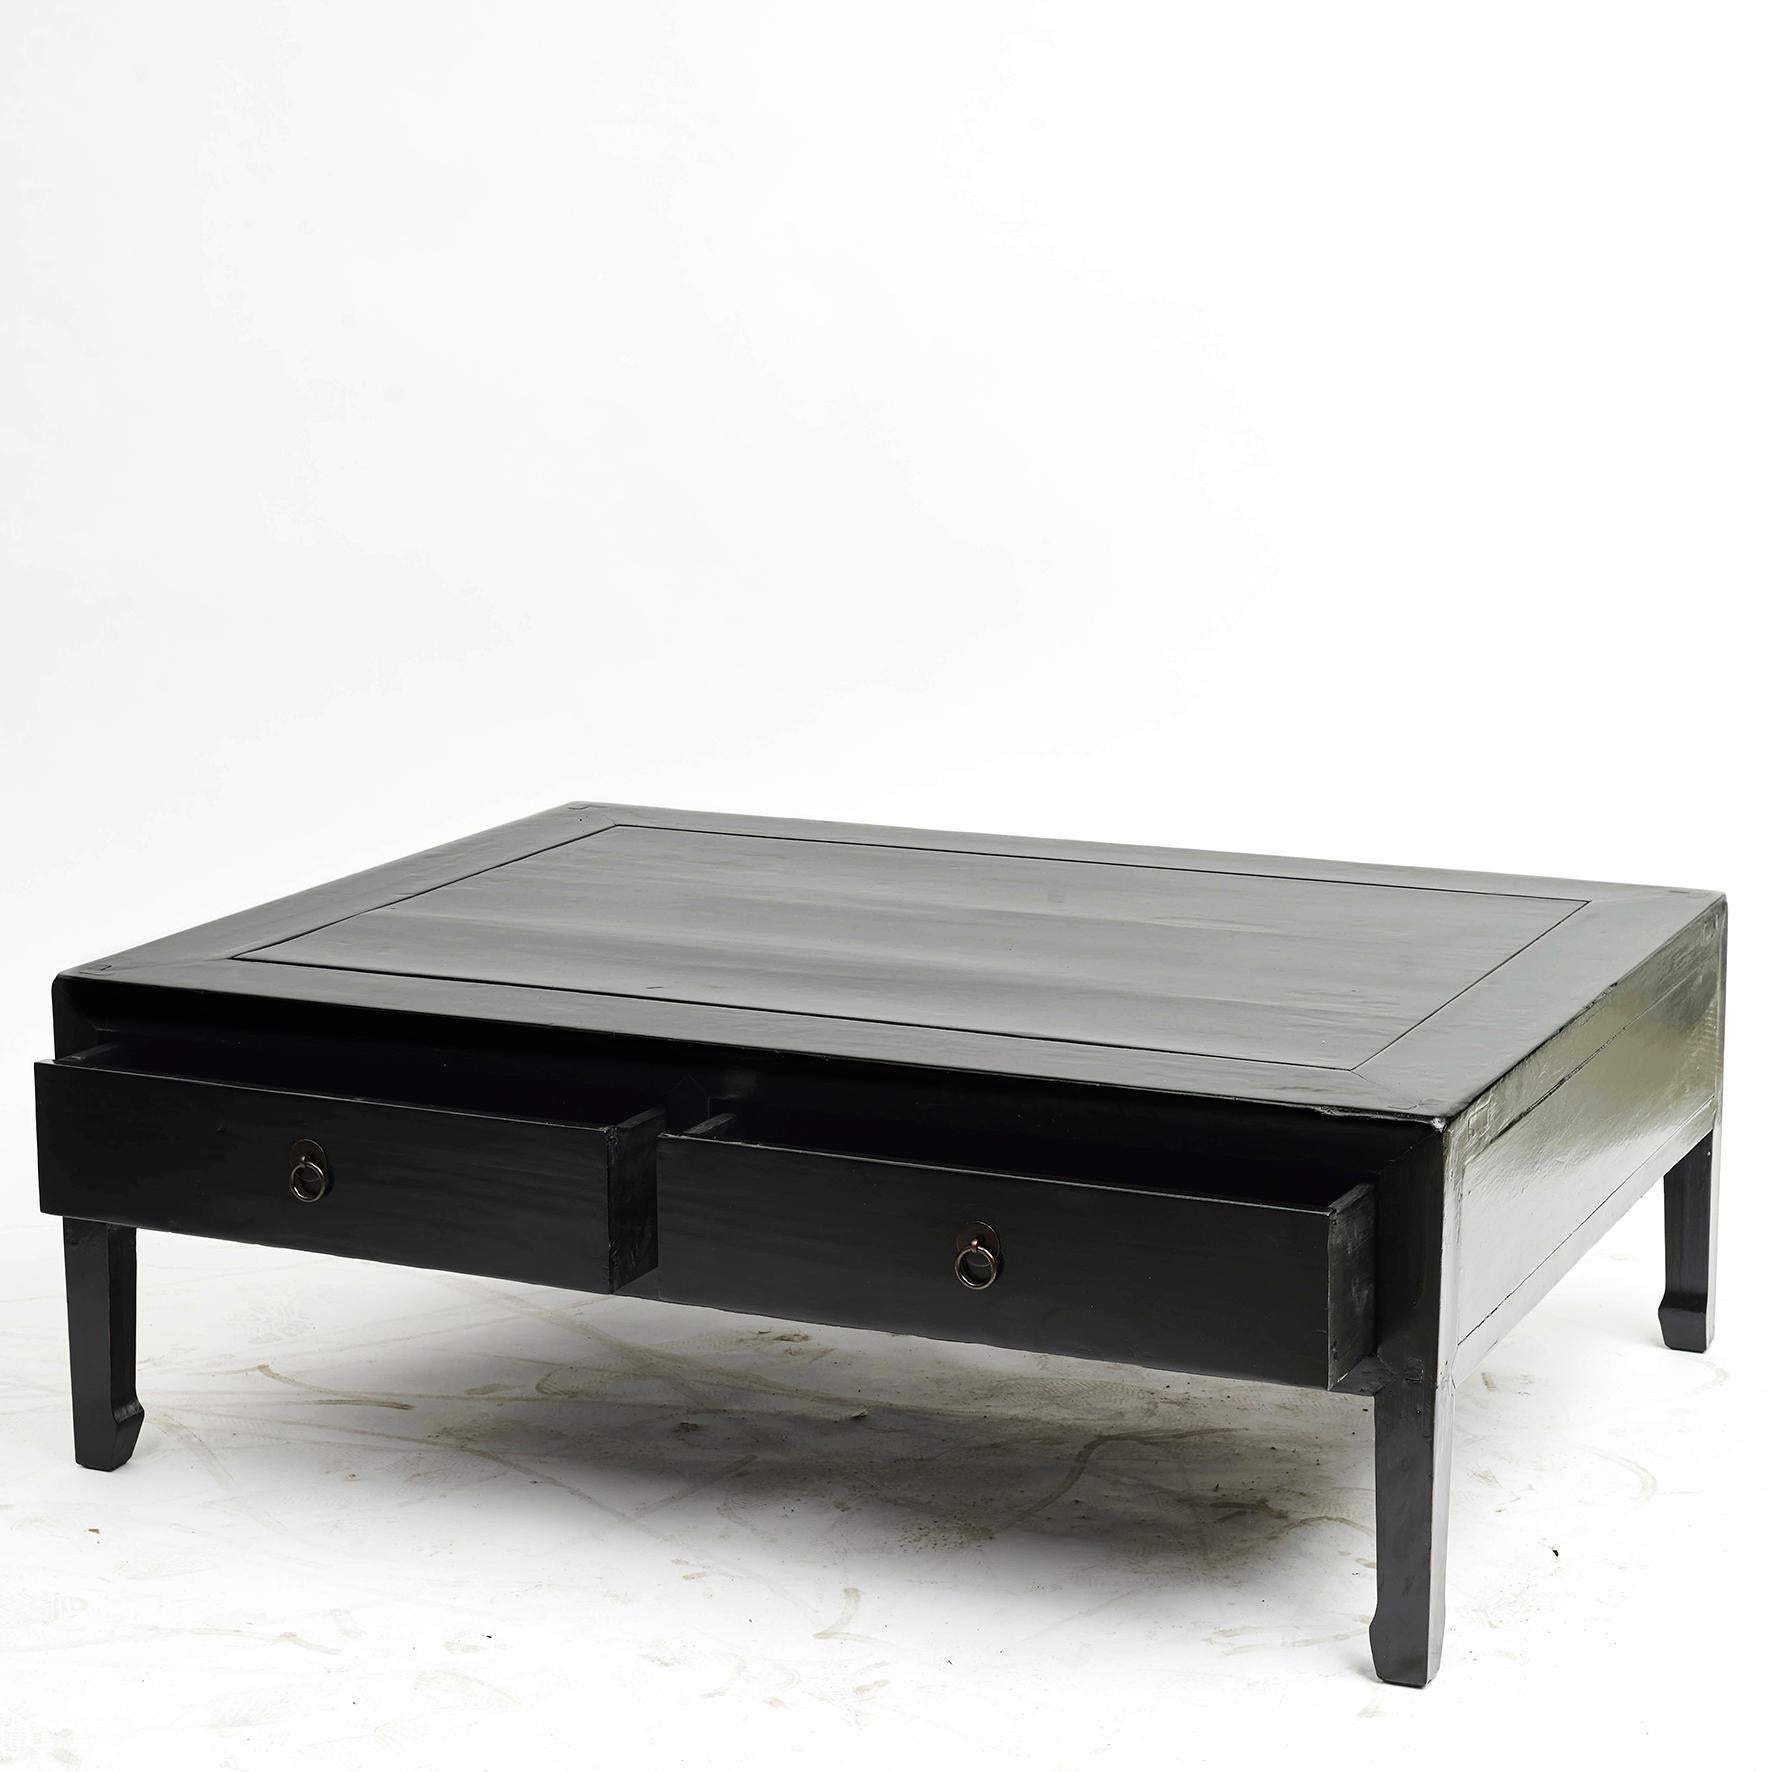 Coffee table in black lacquer with 4 drawers (2 on each side).
Frame around tabletop (floating panel construction), allowing the wood to shrink or swell without destroying the surrounding joinery during seasonal changes in humidity.
Jiangsu